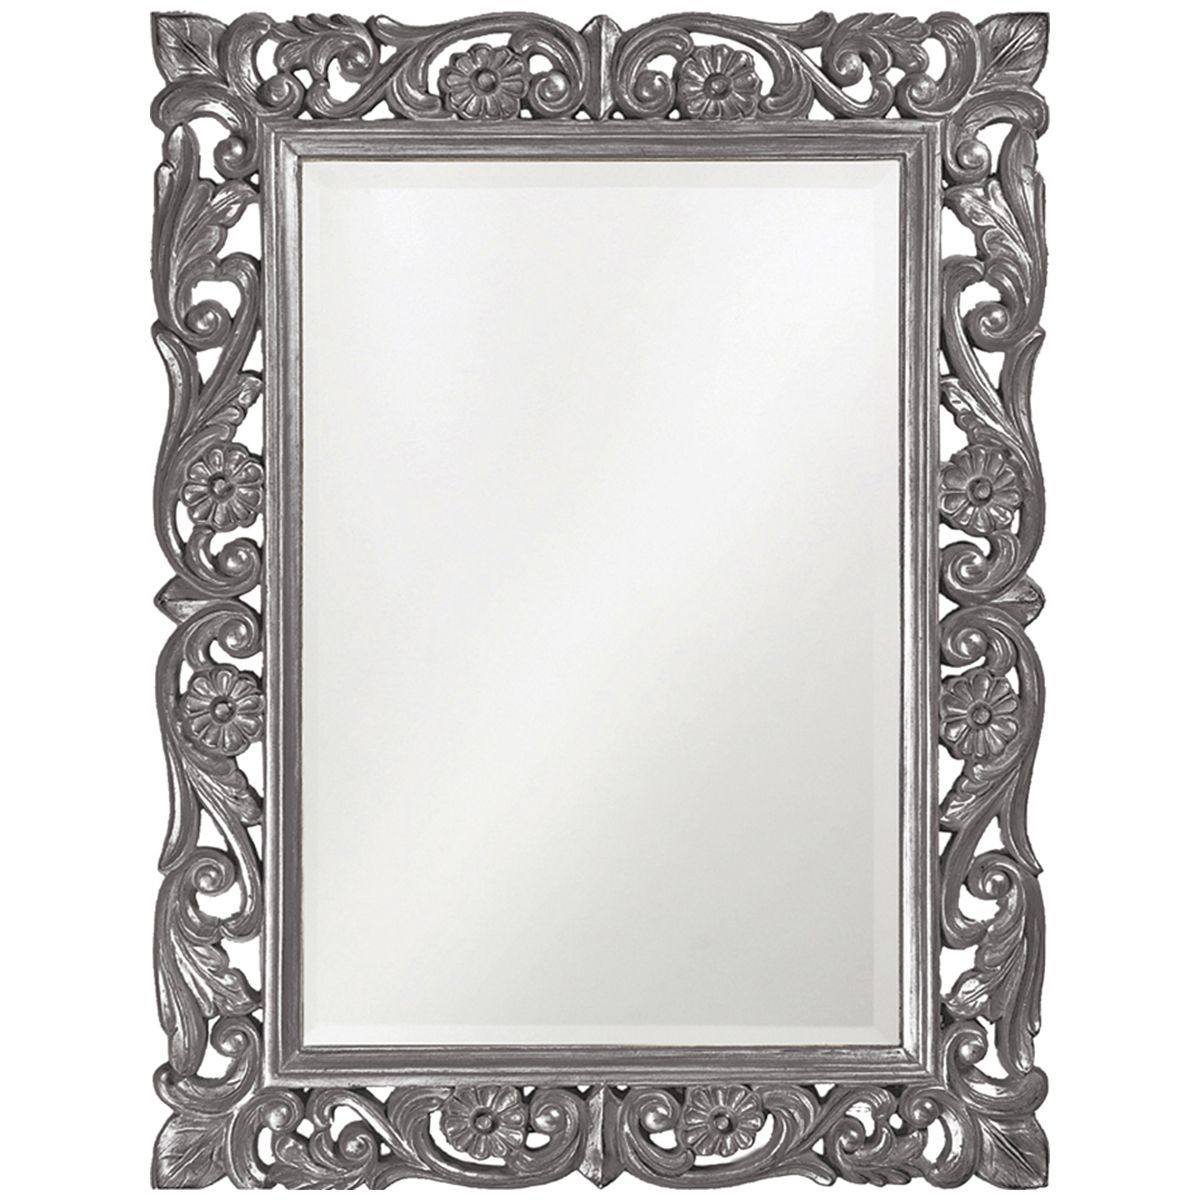 Howard Elliott Chateau Charcoal Gray Mirror 2113ch | Pink Wall Mirrors Within Charcoal Gray Wall Mirrors (View 5 of 15)